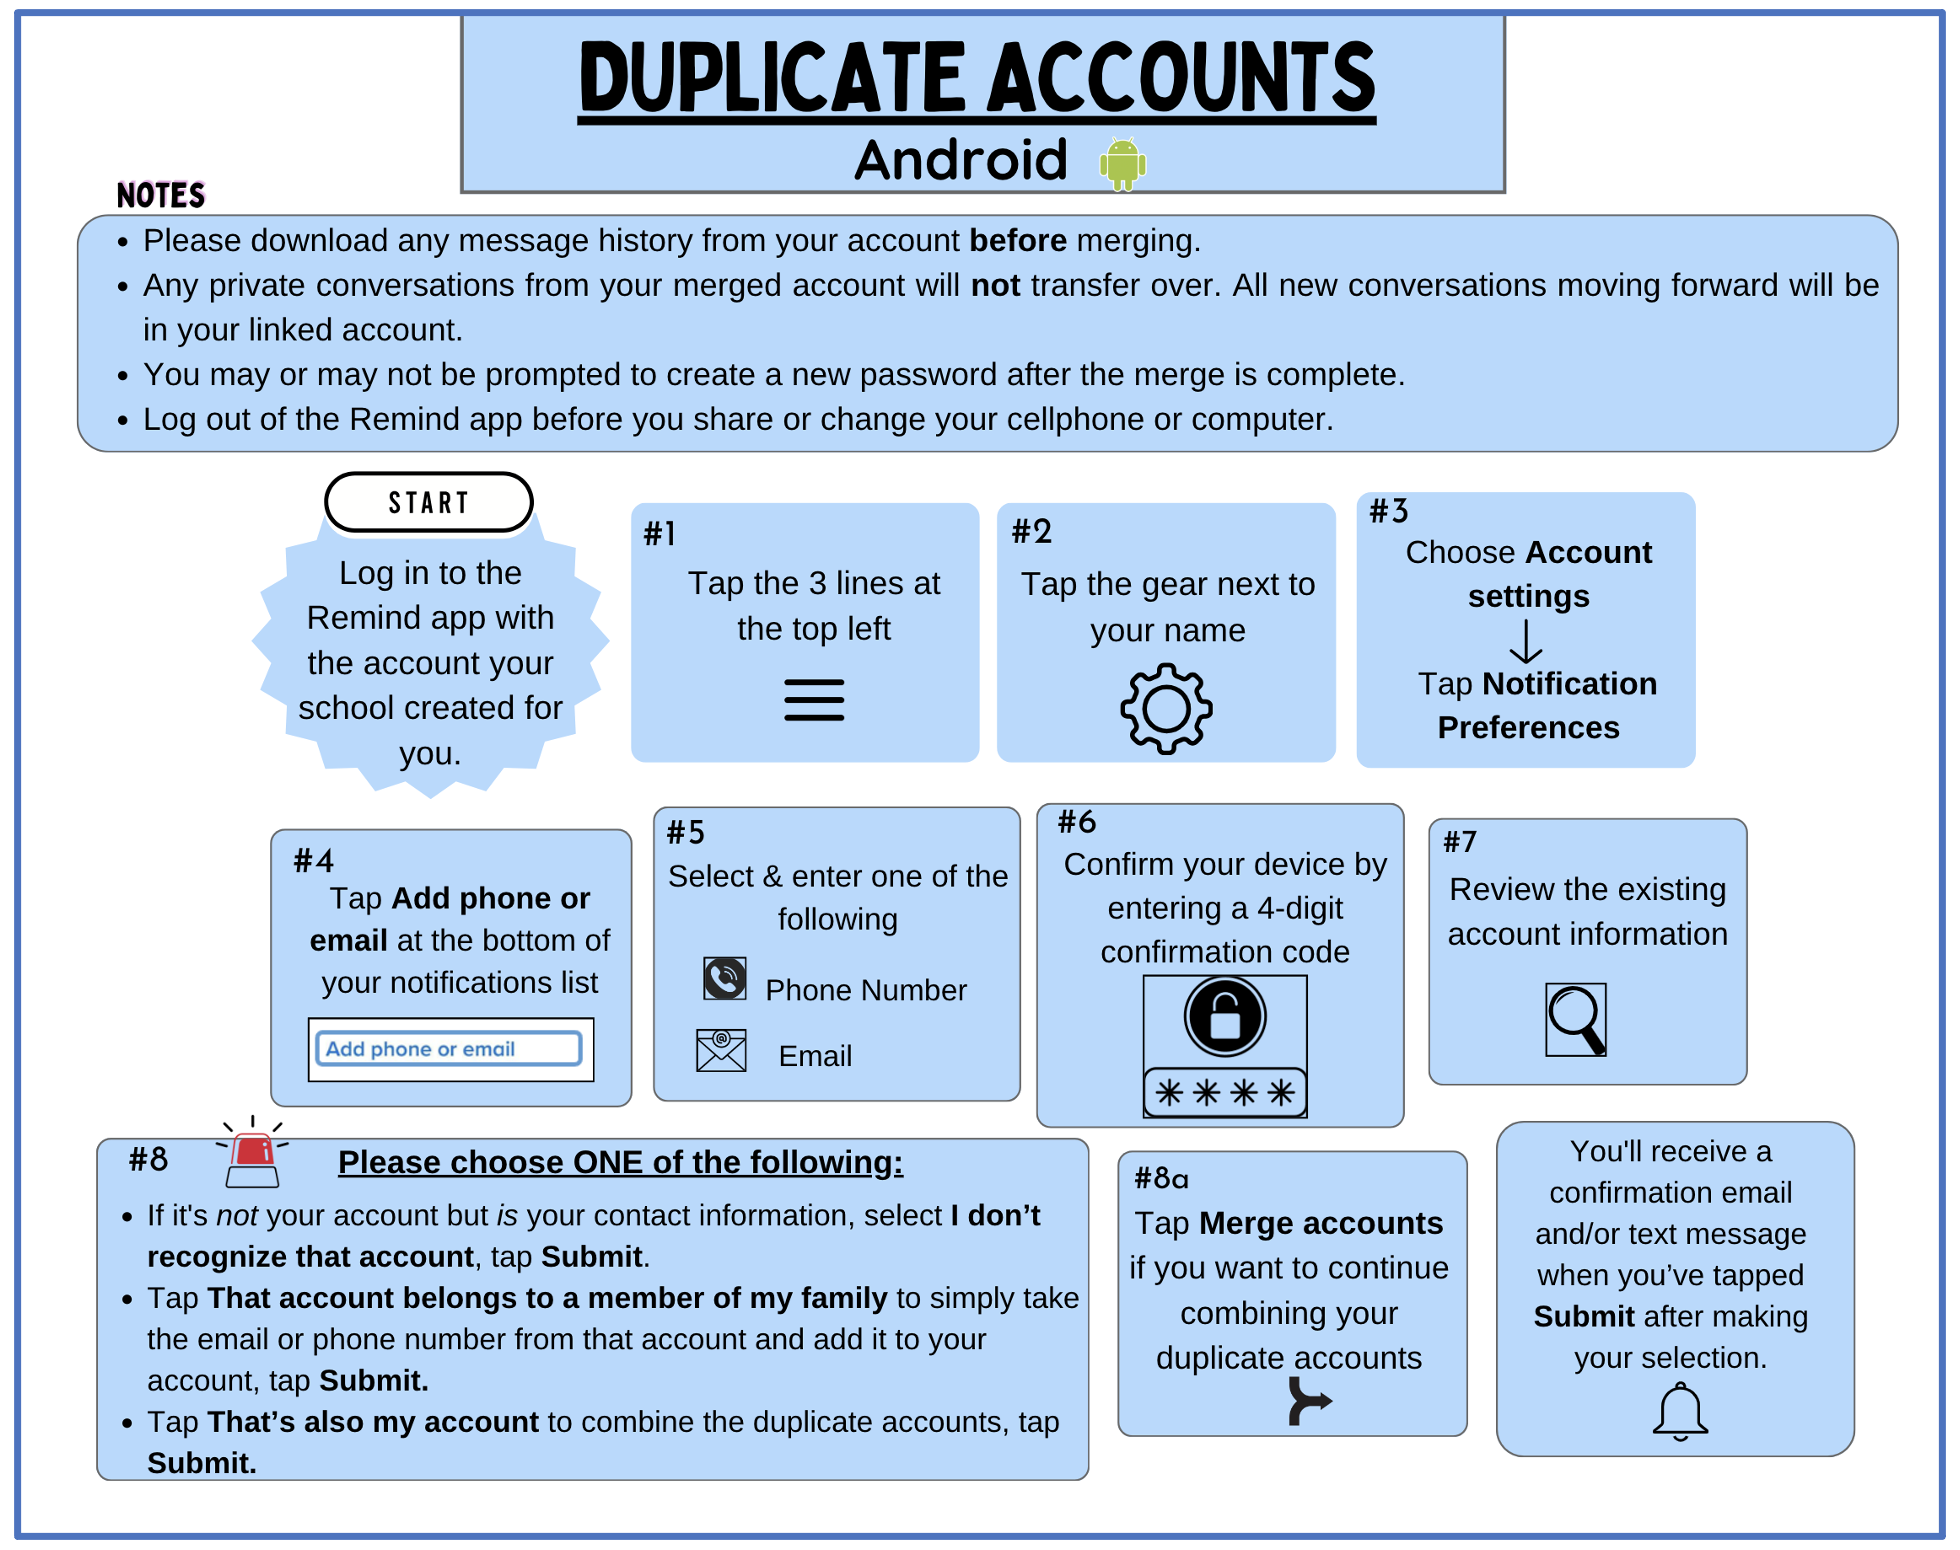 duplicate accounts android.png